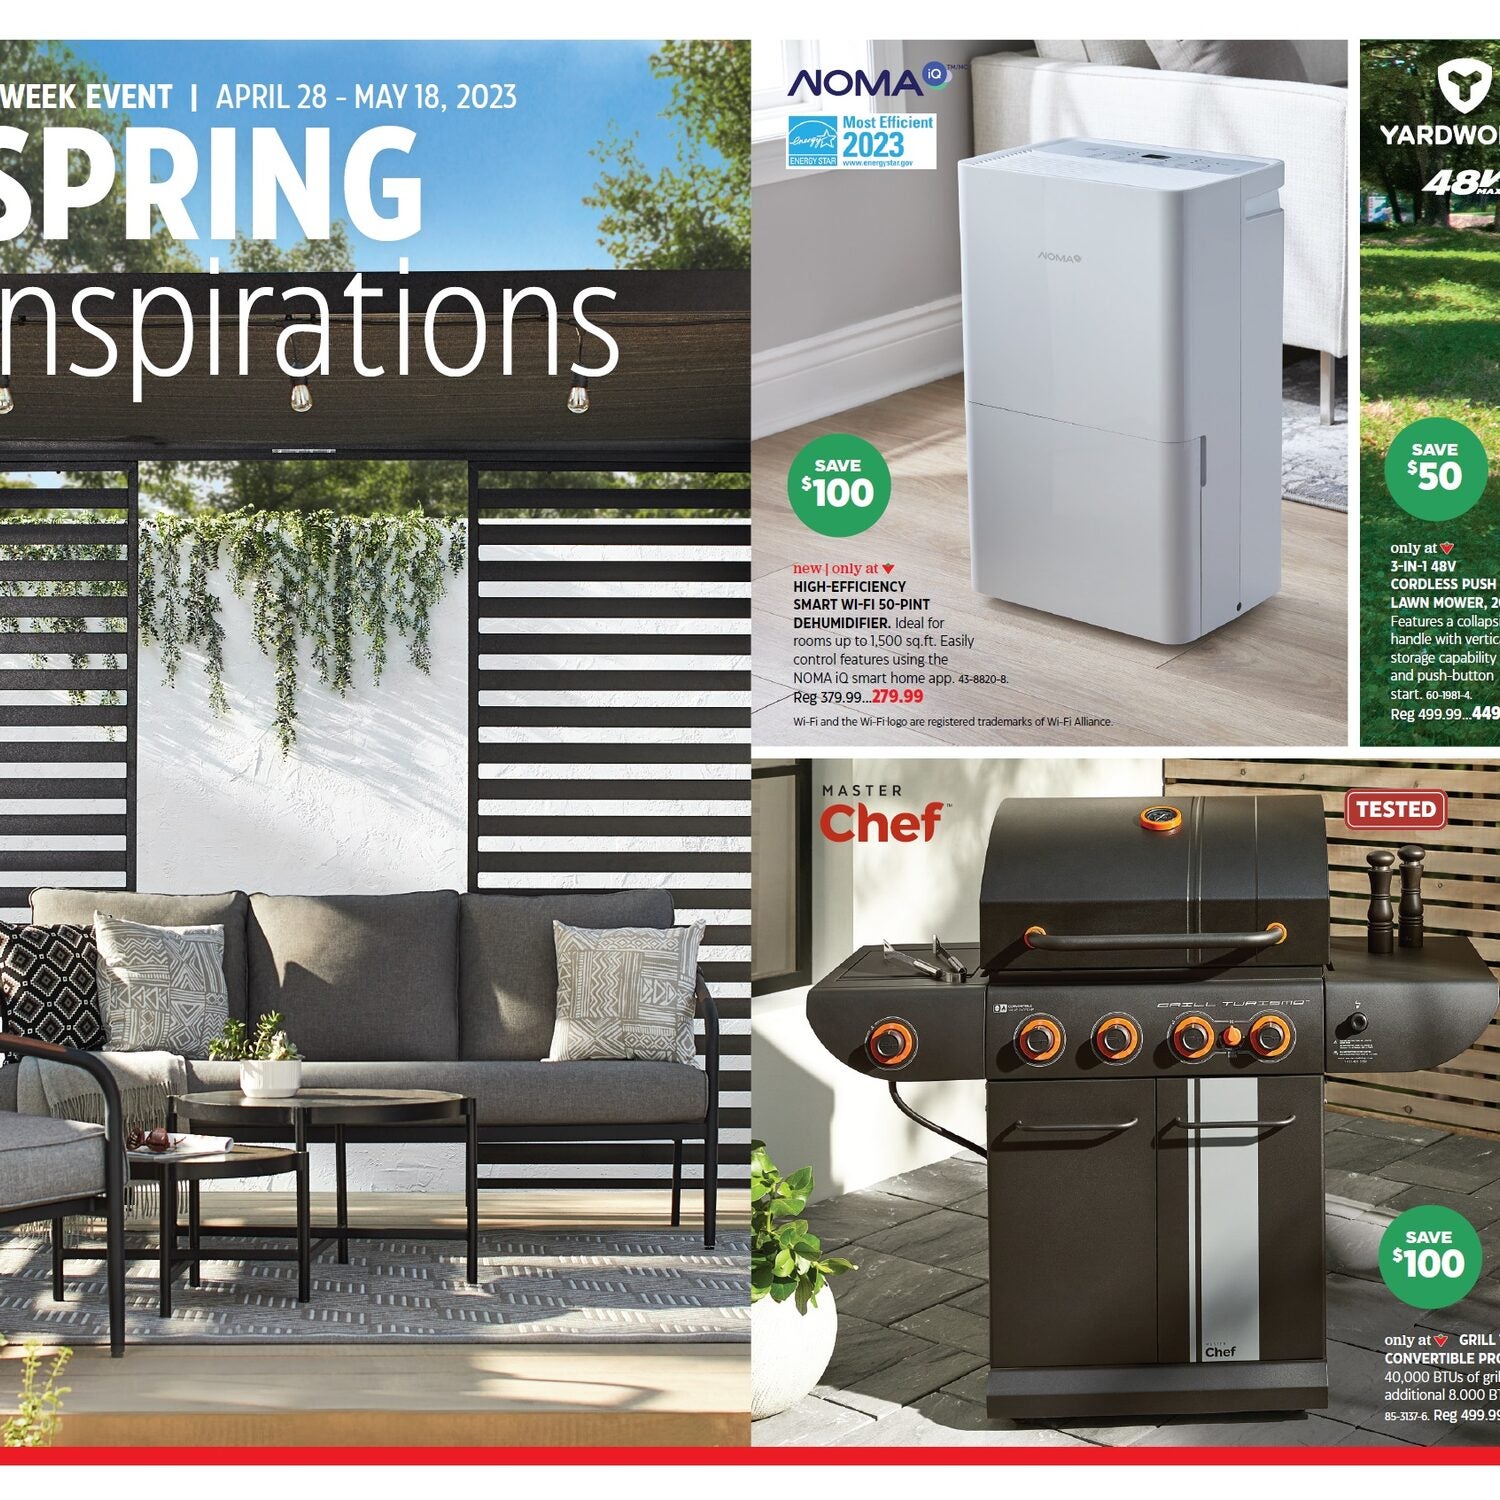 Canadian Tire Weekly Flyer - Spring Inspirations (West/YT) - Apr